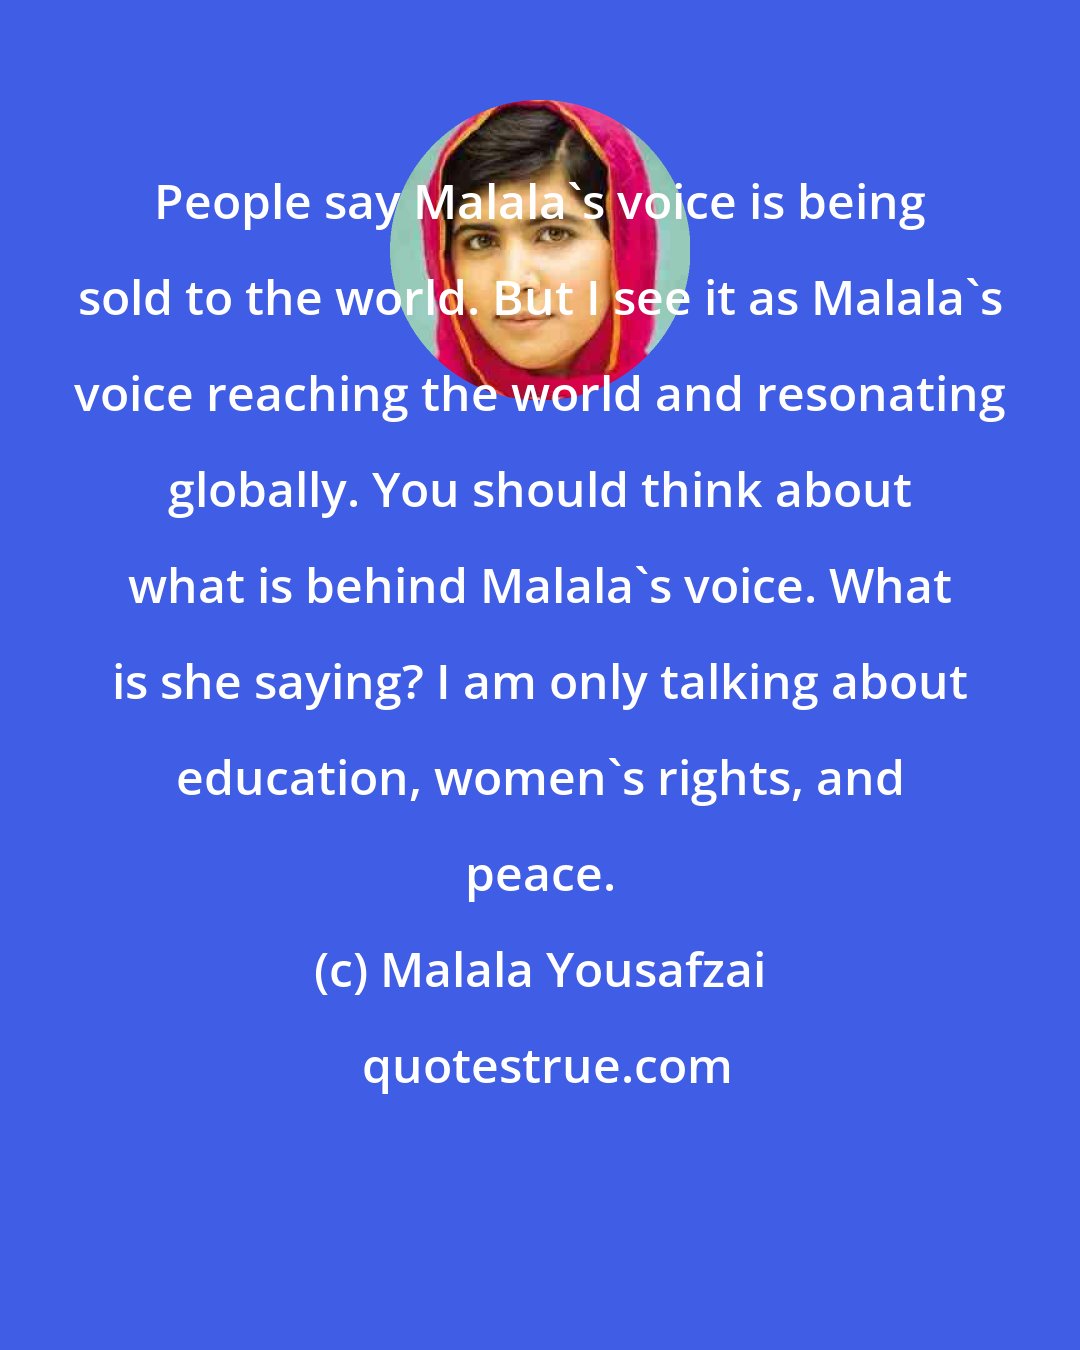 Malala Yousafzai: People say Malala's voice is being sold to the world. But I see it as Malala's voice reaching the world and resonating globally. You should think about what is behind Malala's voice. What is she saying? I am only talking about education, women's rights, and peace.